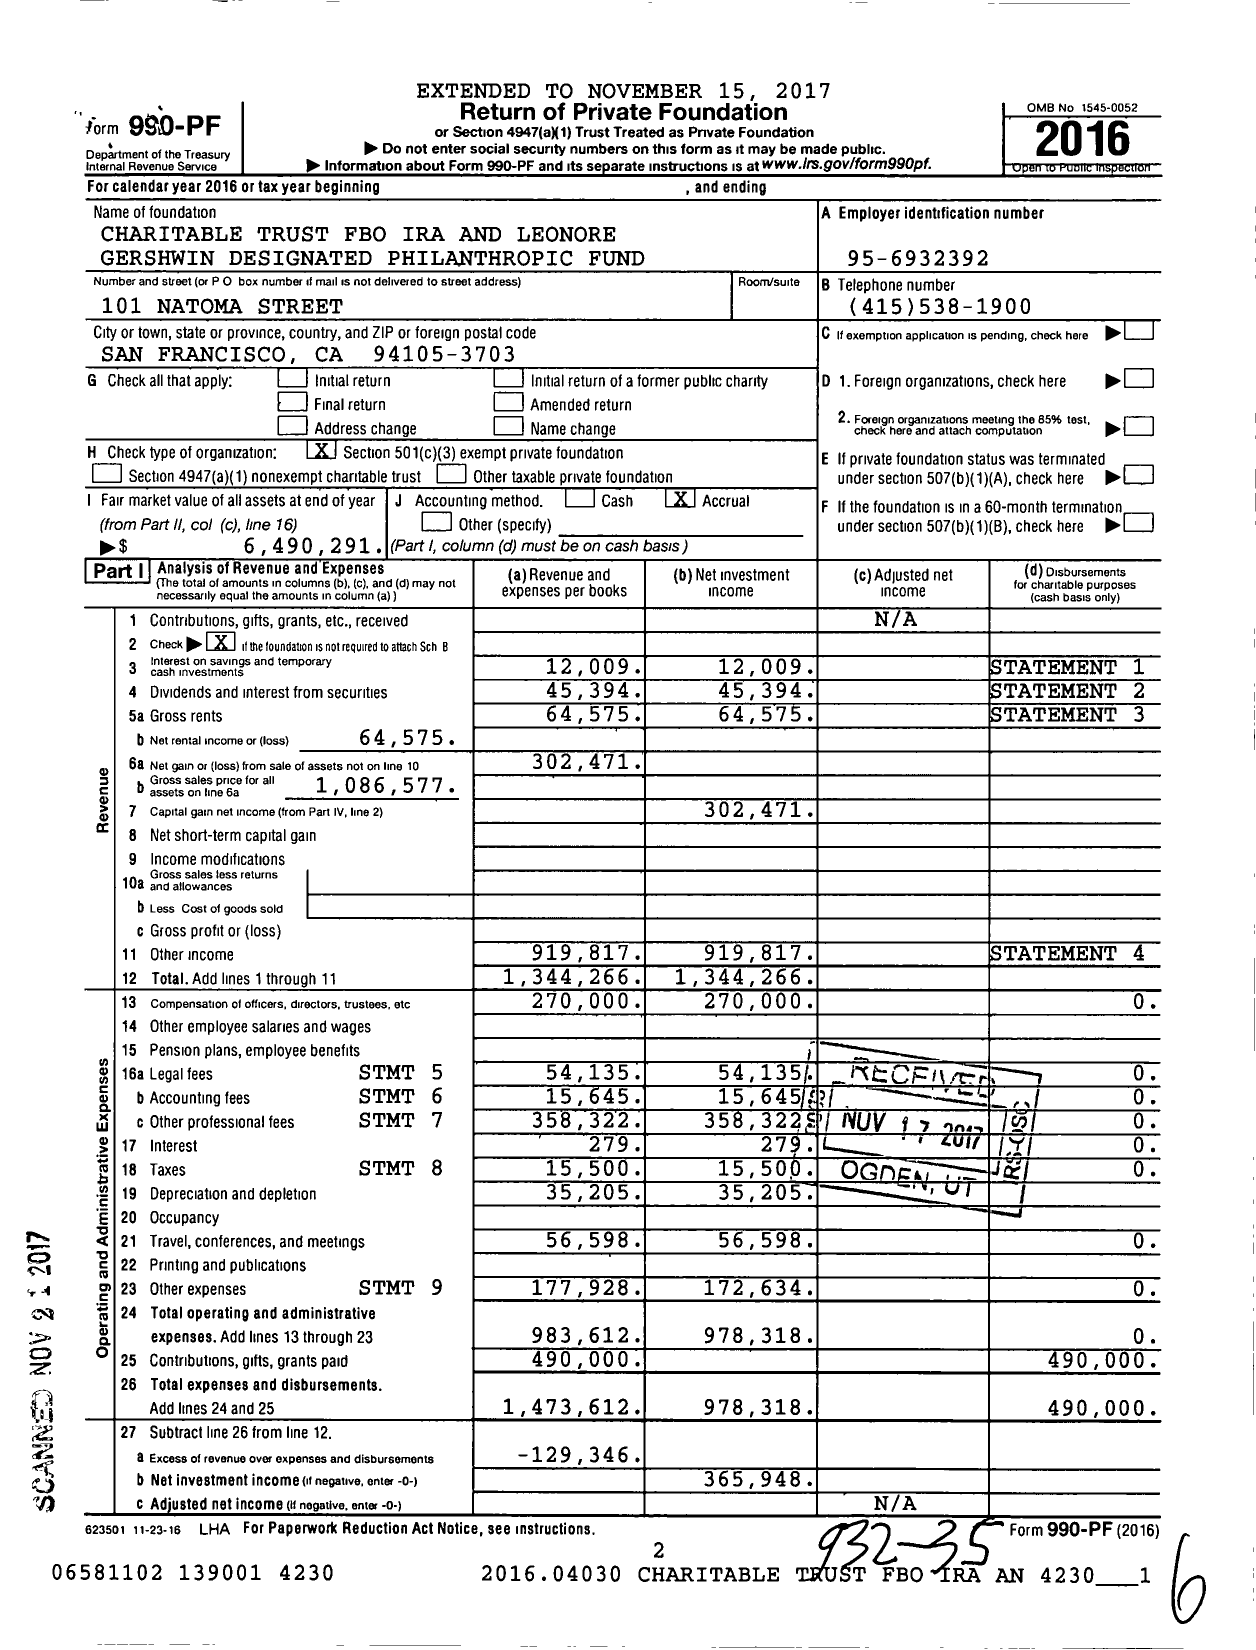 Image of first page of 2016 Form 990PF for Charitable Trust FBO Ira and Leonore Gershwin Designated Philanthropic Fund